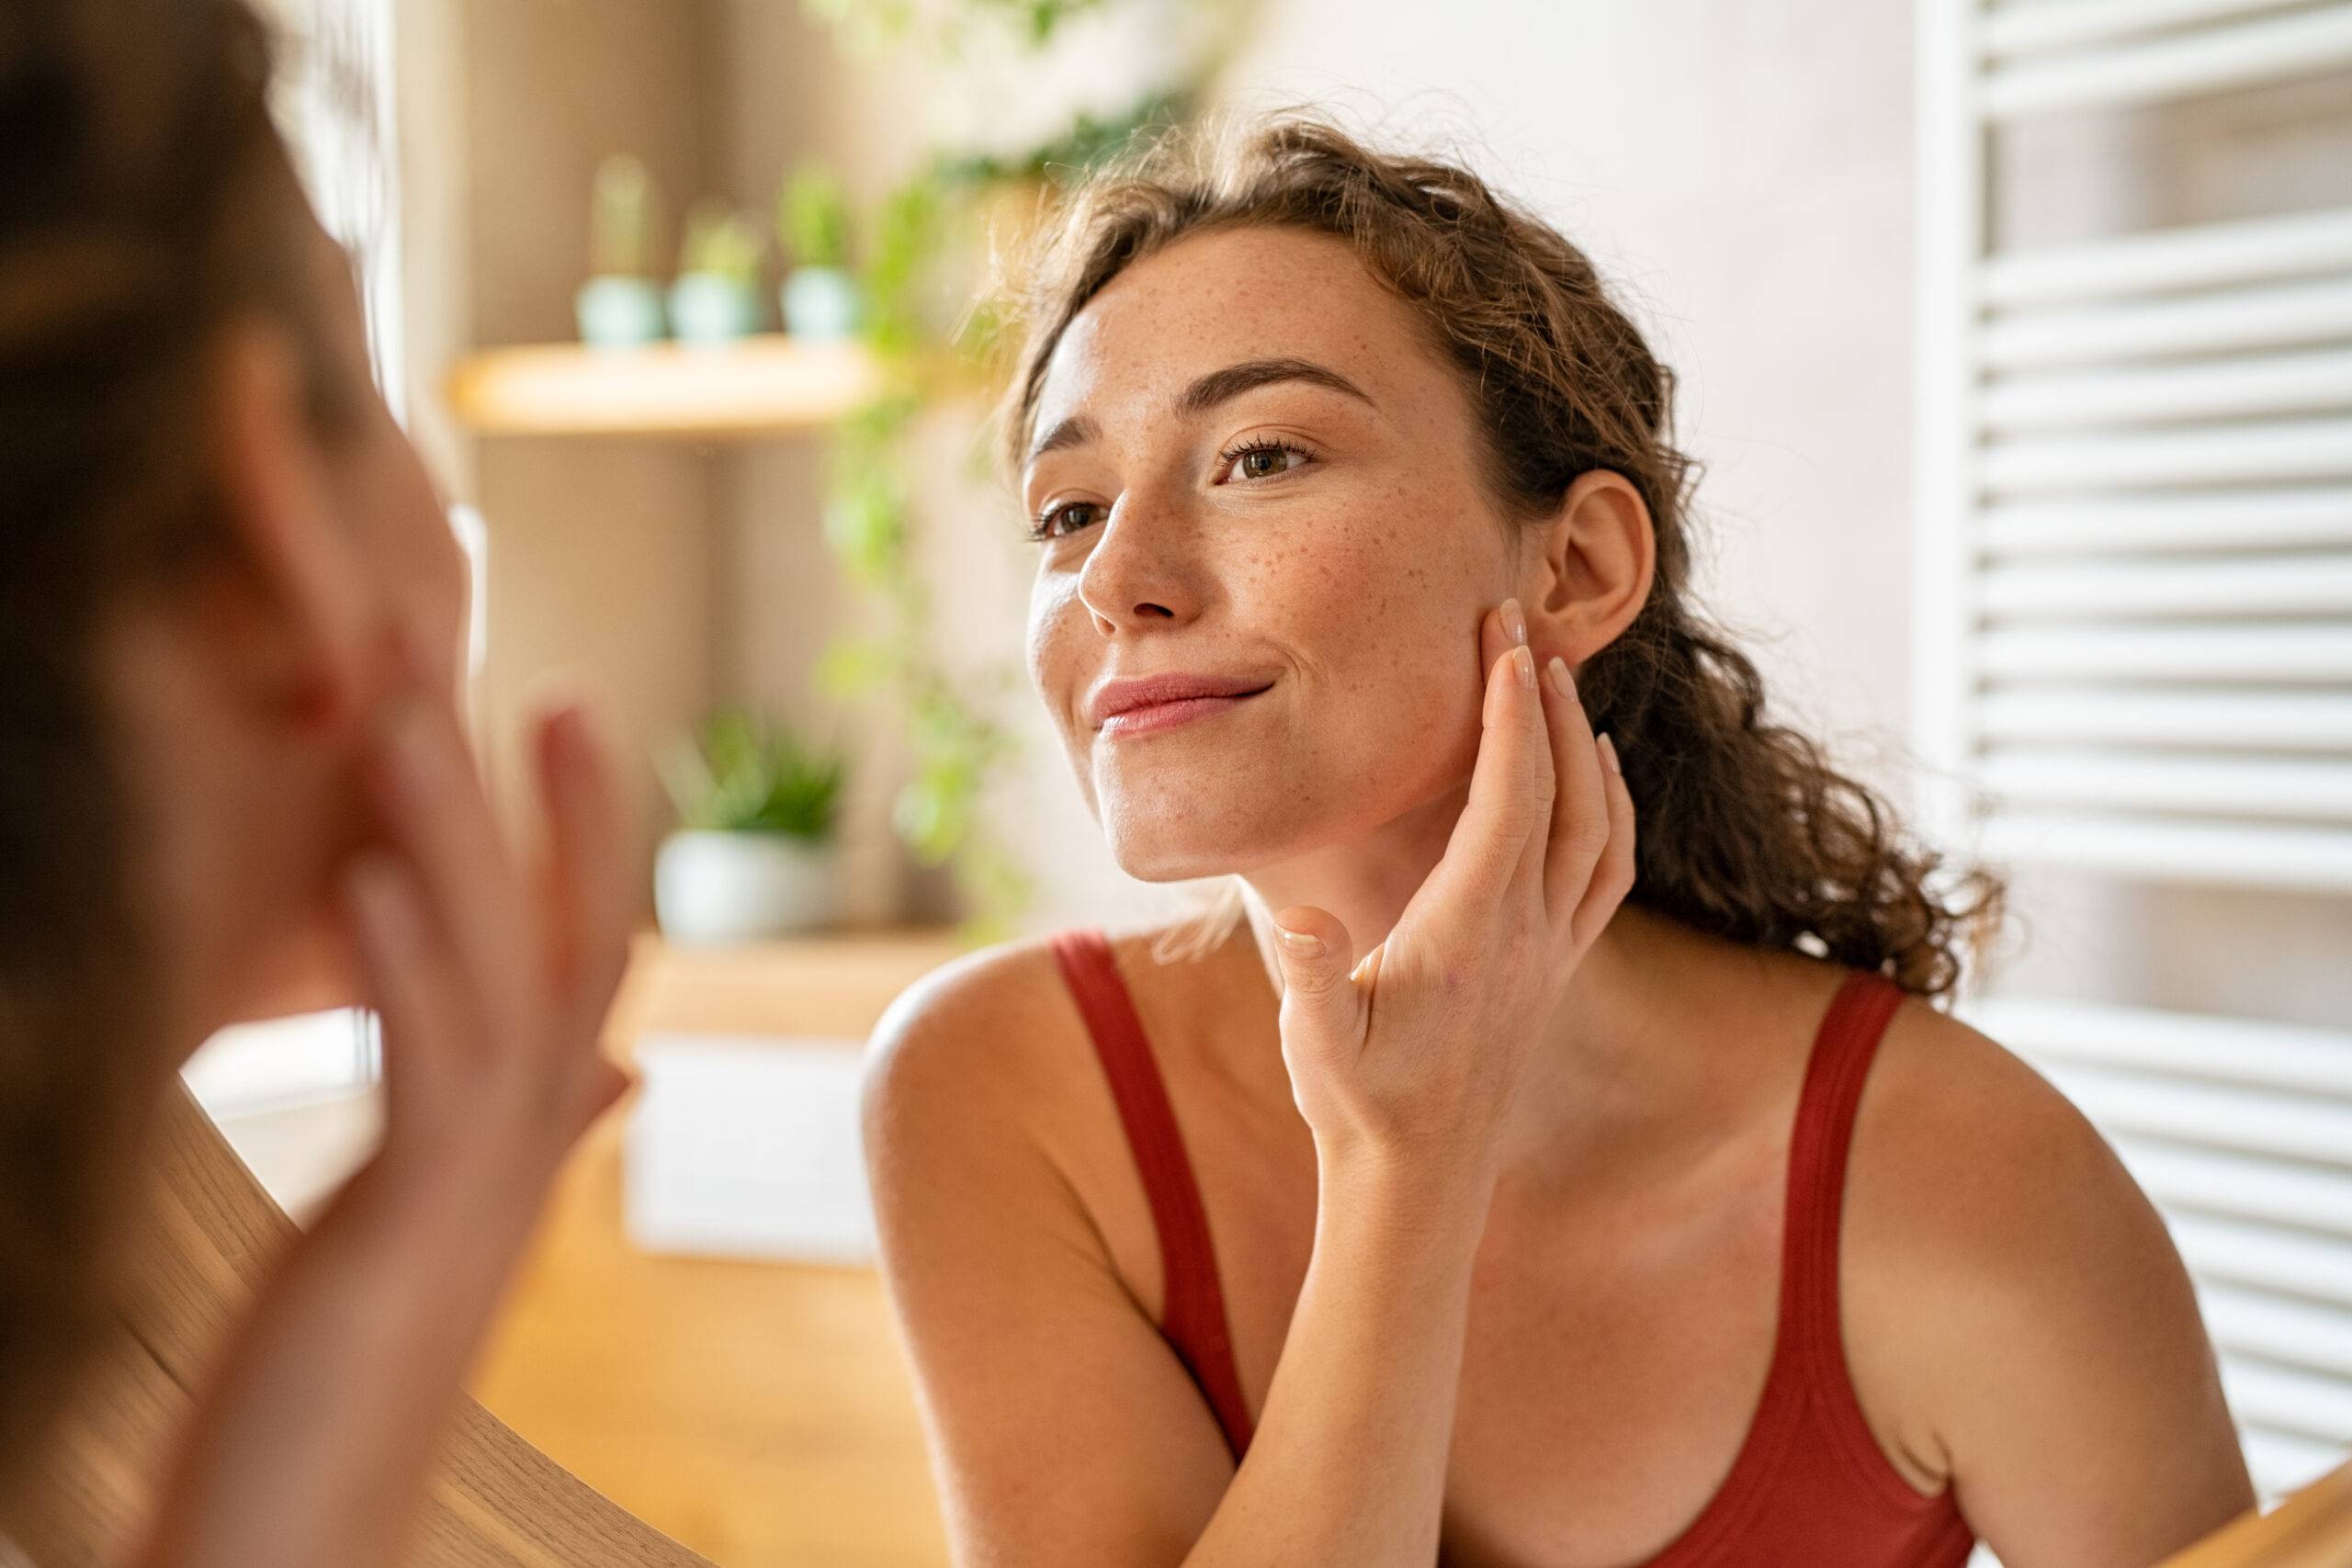 Firming and reductive massage for jowls